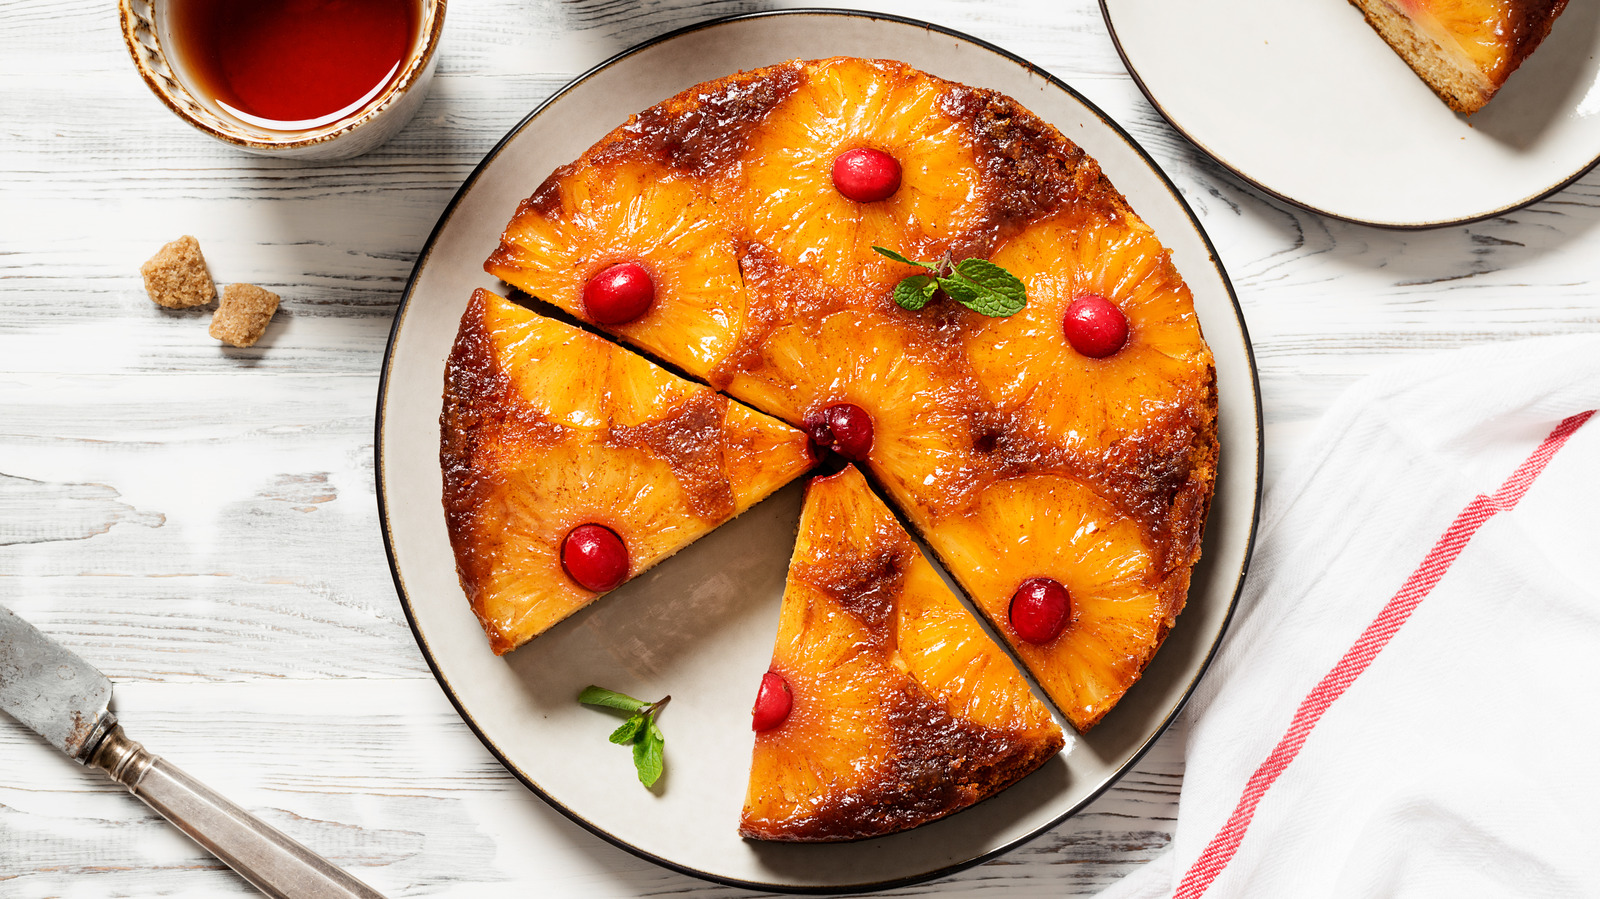 https://www.tastingtable.com/img/gallery/the-absolute-best-pan-for-toasty-pineapple-upside-down-cakes/l-intro-1686776550.jpg